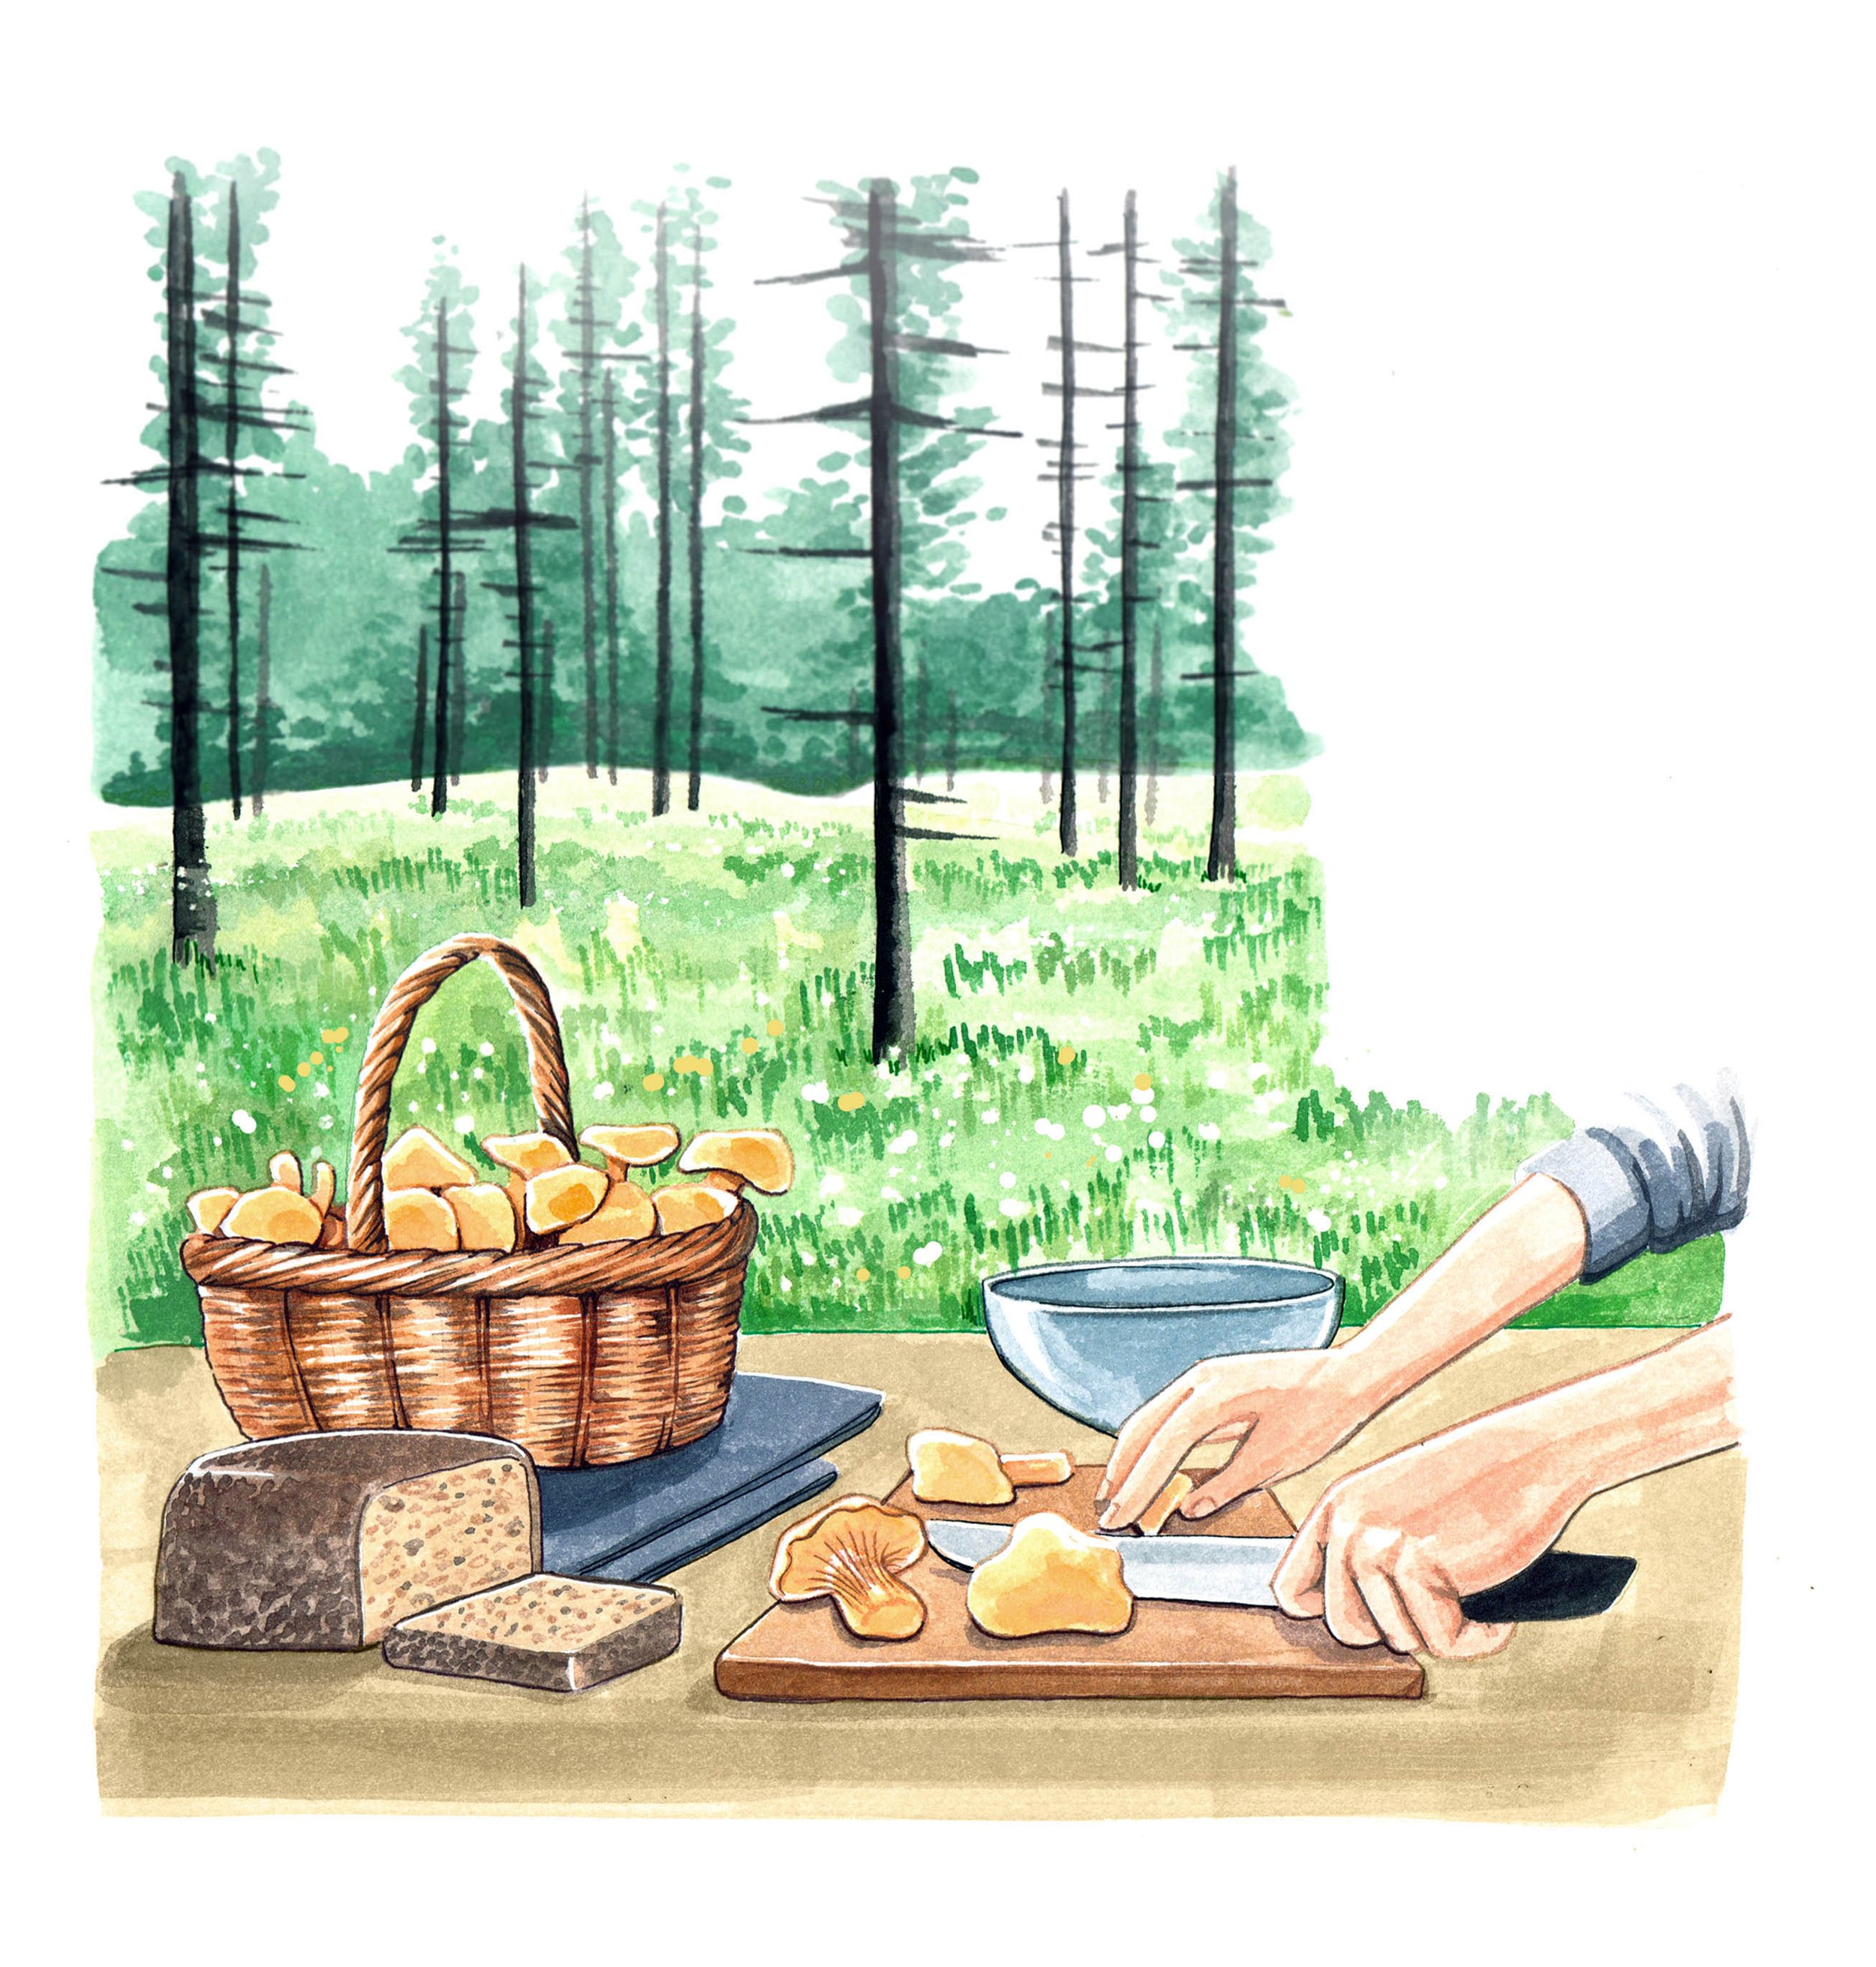 foraging watercolour illustration by Willa Gebbie